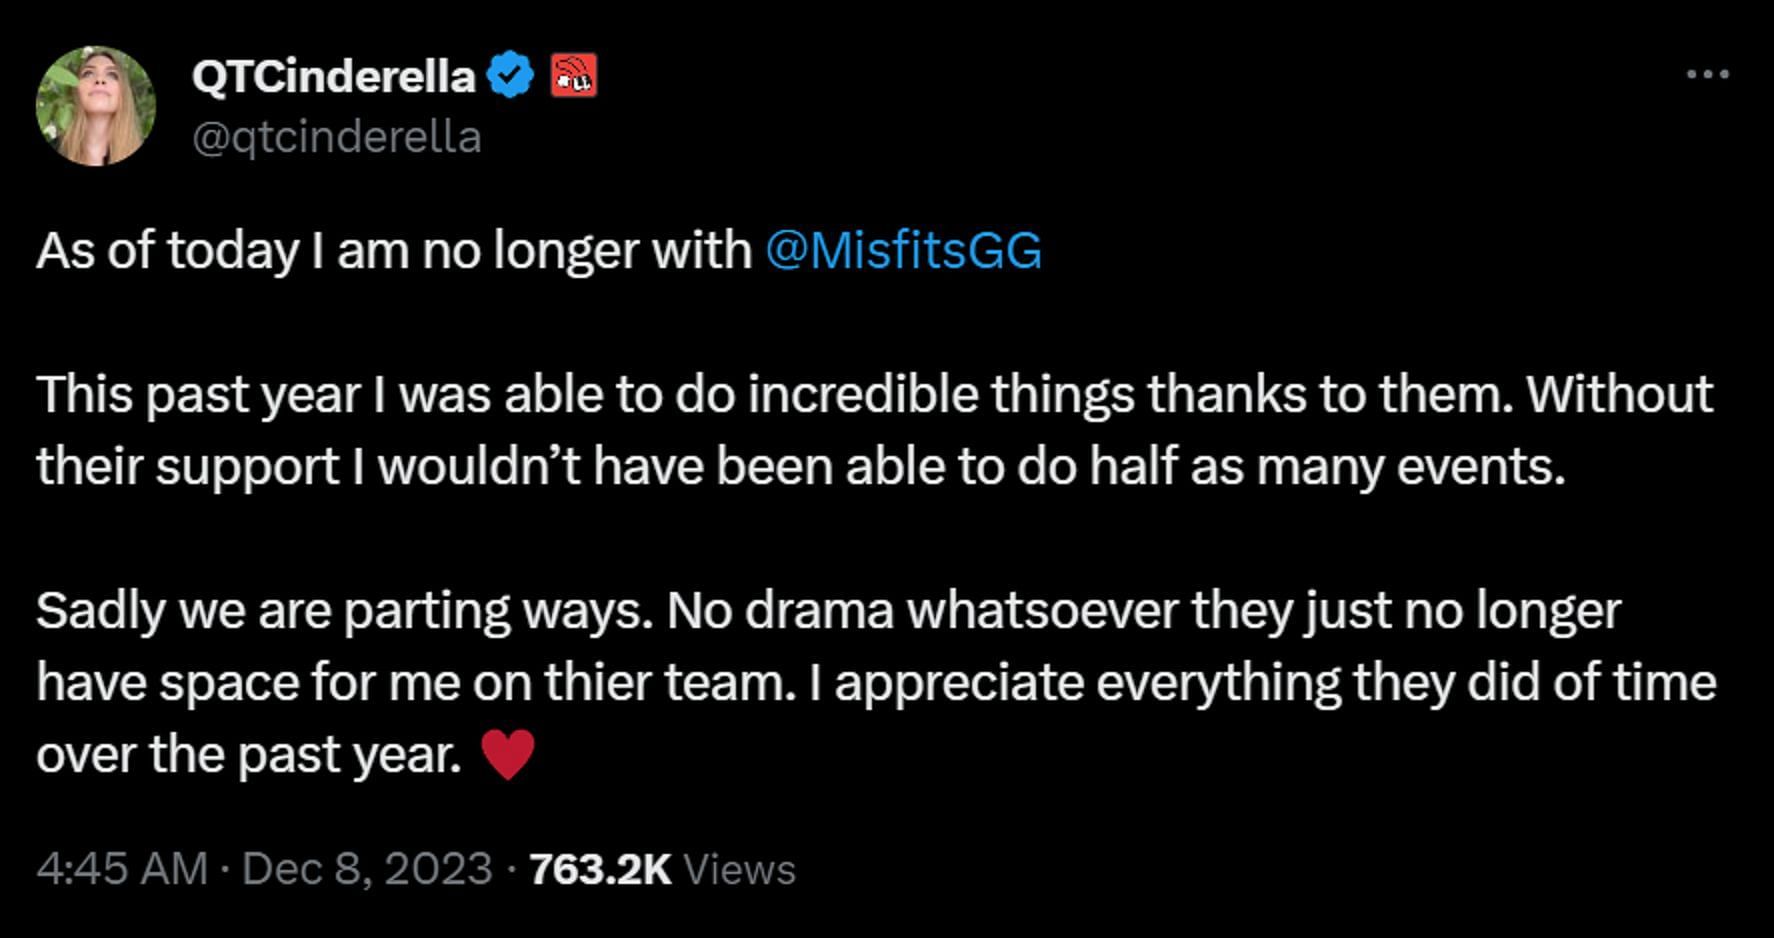 Streamer QTCinderella Leaves TSM, Claims Org Didn't Support Her